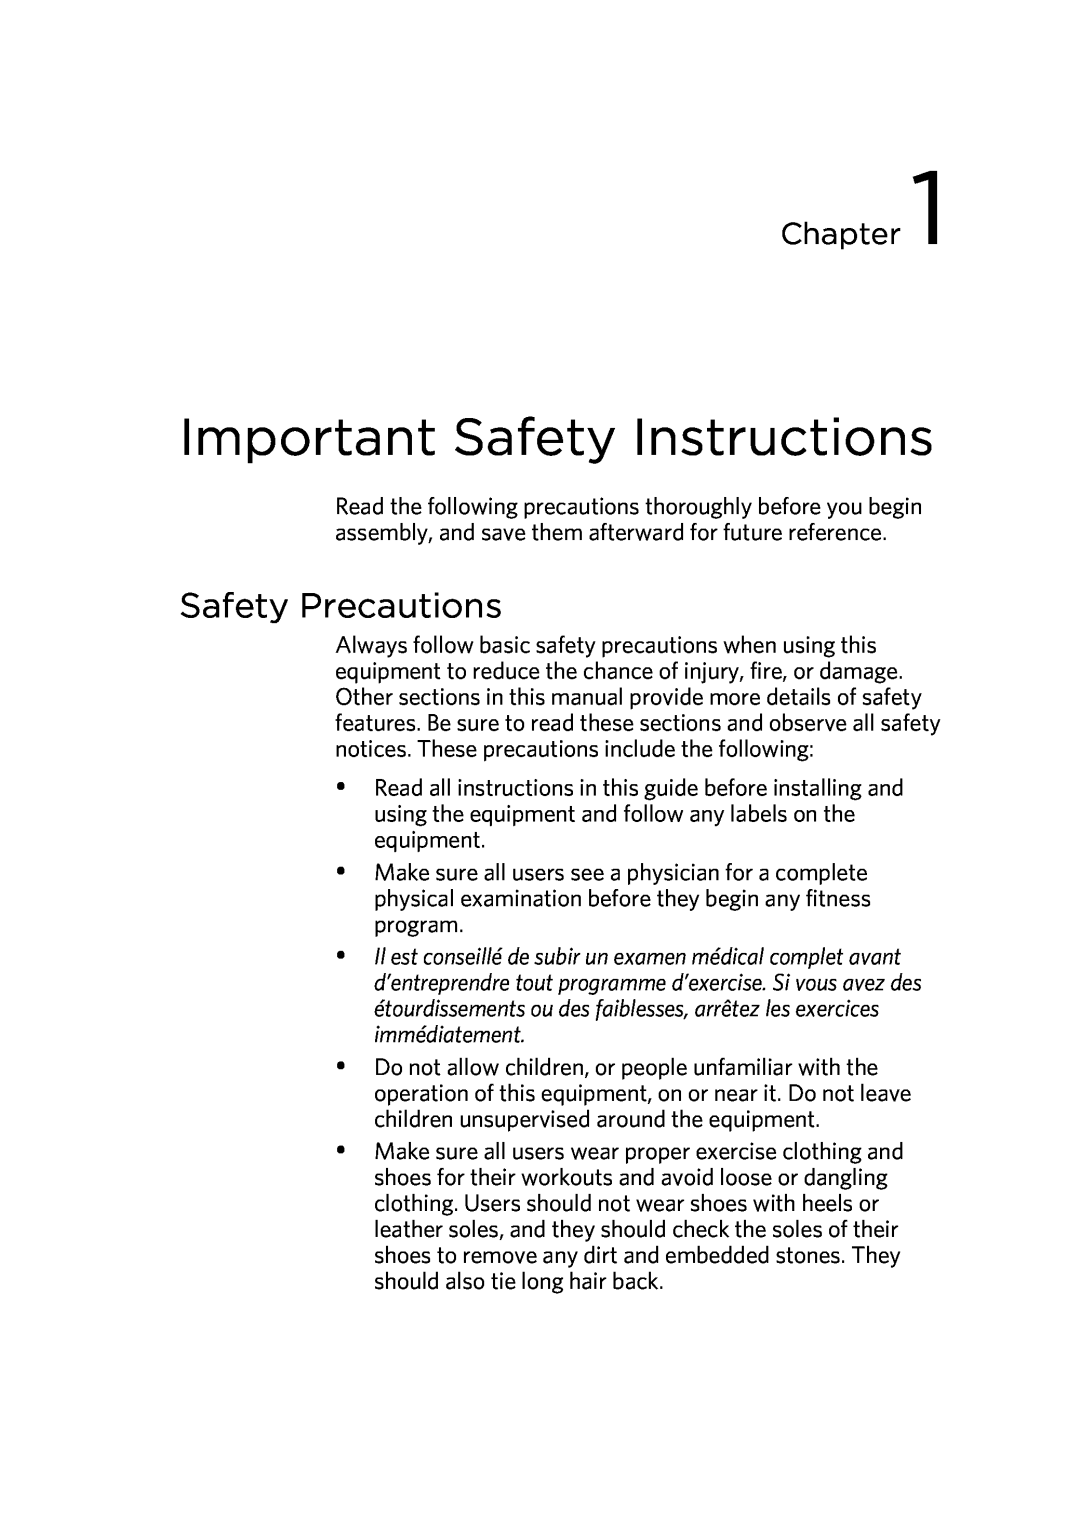 Precor 300753-201 manual Important Safety Instructions, Safety Precautions, Chapter 